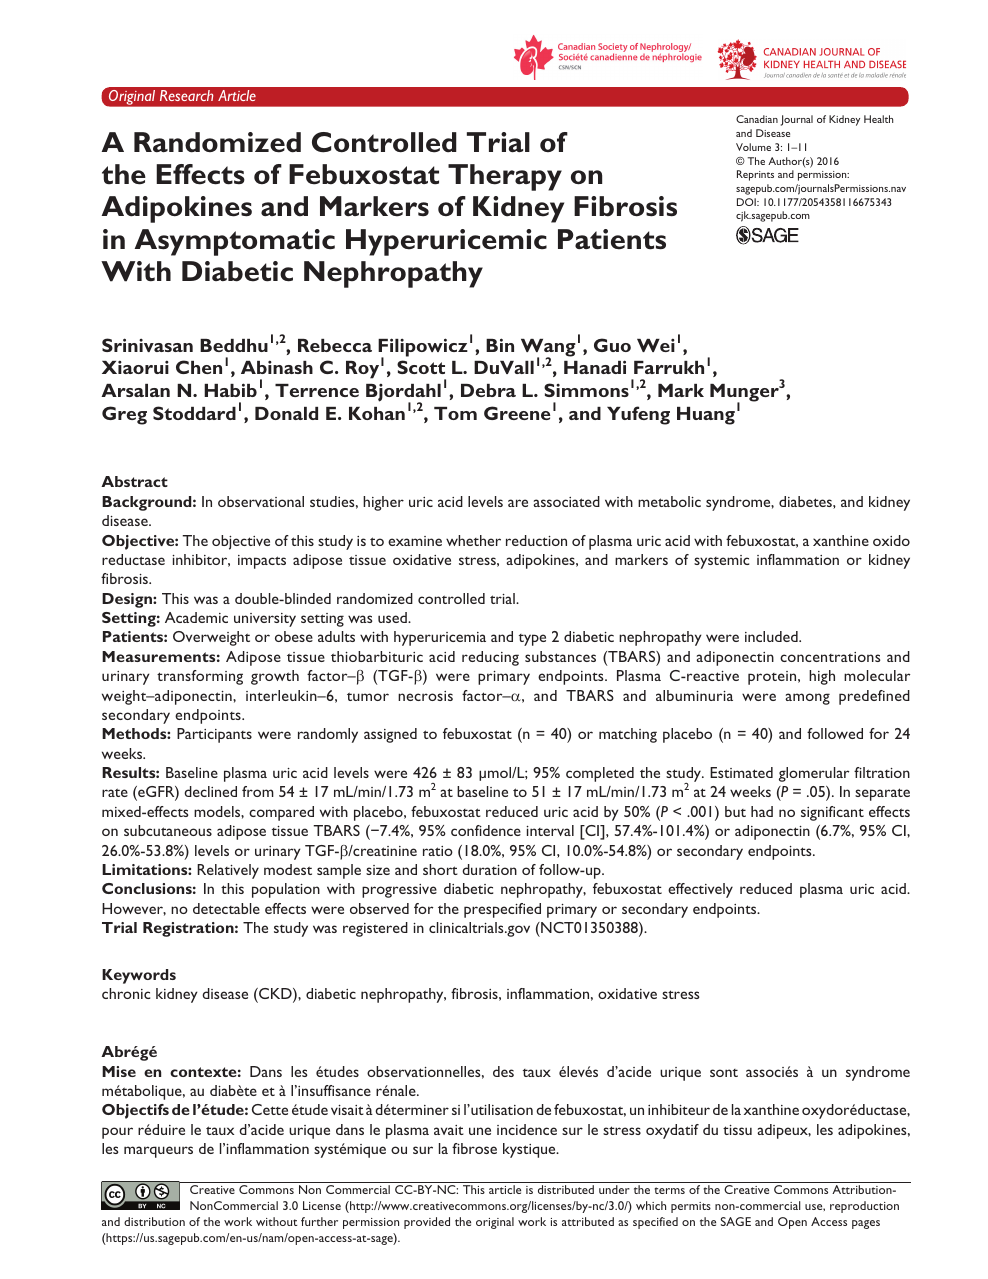 A Randomized Controlled Trial Of The Effects Of Febuxostat Therapy On Adipokines And Markers Of Kidney Fibrosis In Asymptomatic Hyperuricemic Patients With Diabetic Nephropathy Topic Of Research Paper In Health Sciences